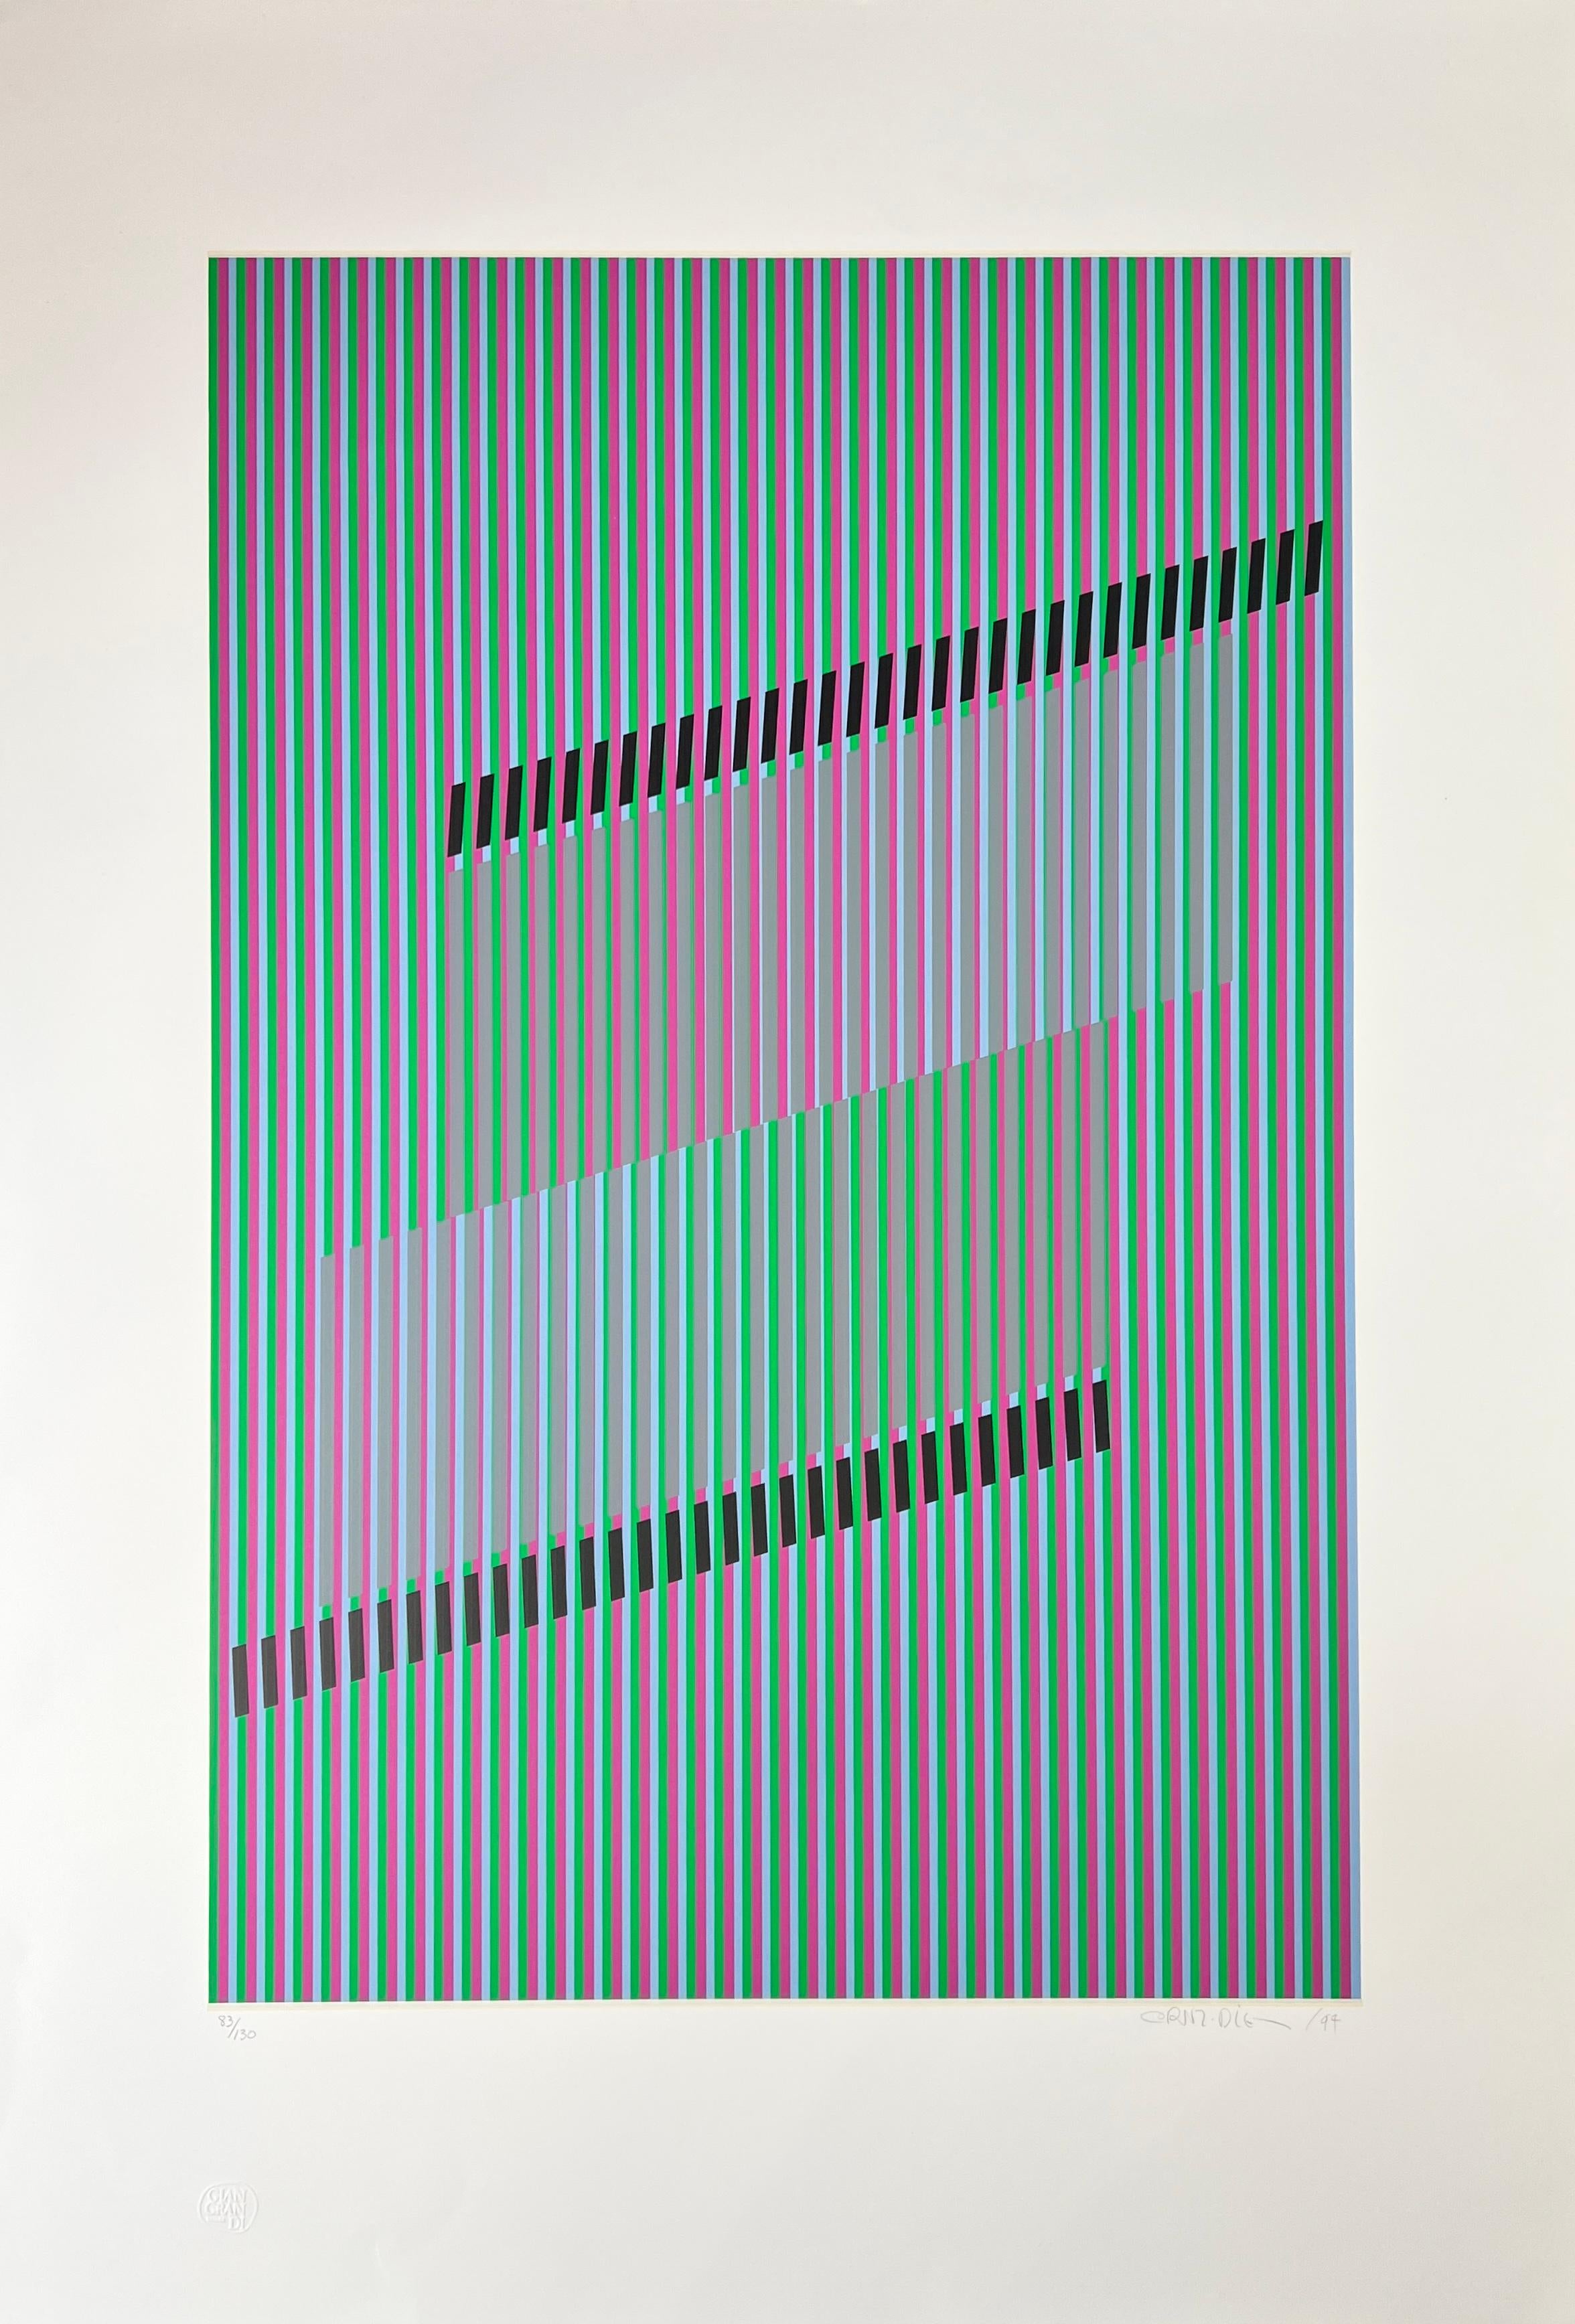 Carlos Cruz-Diez ( 1923 – 2019 ) – hand-signed Serigraphy on Arches paper – 1994